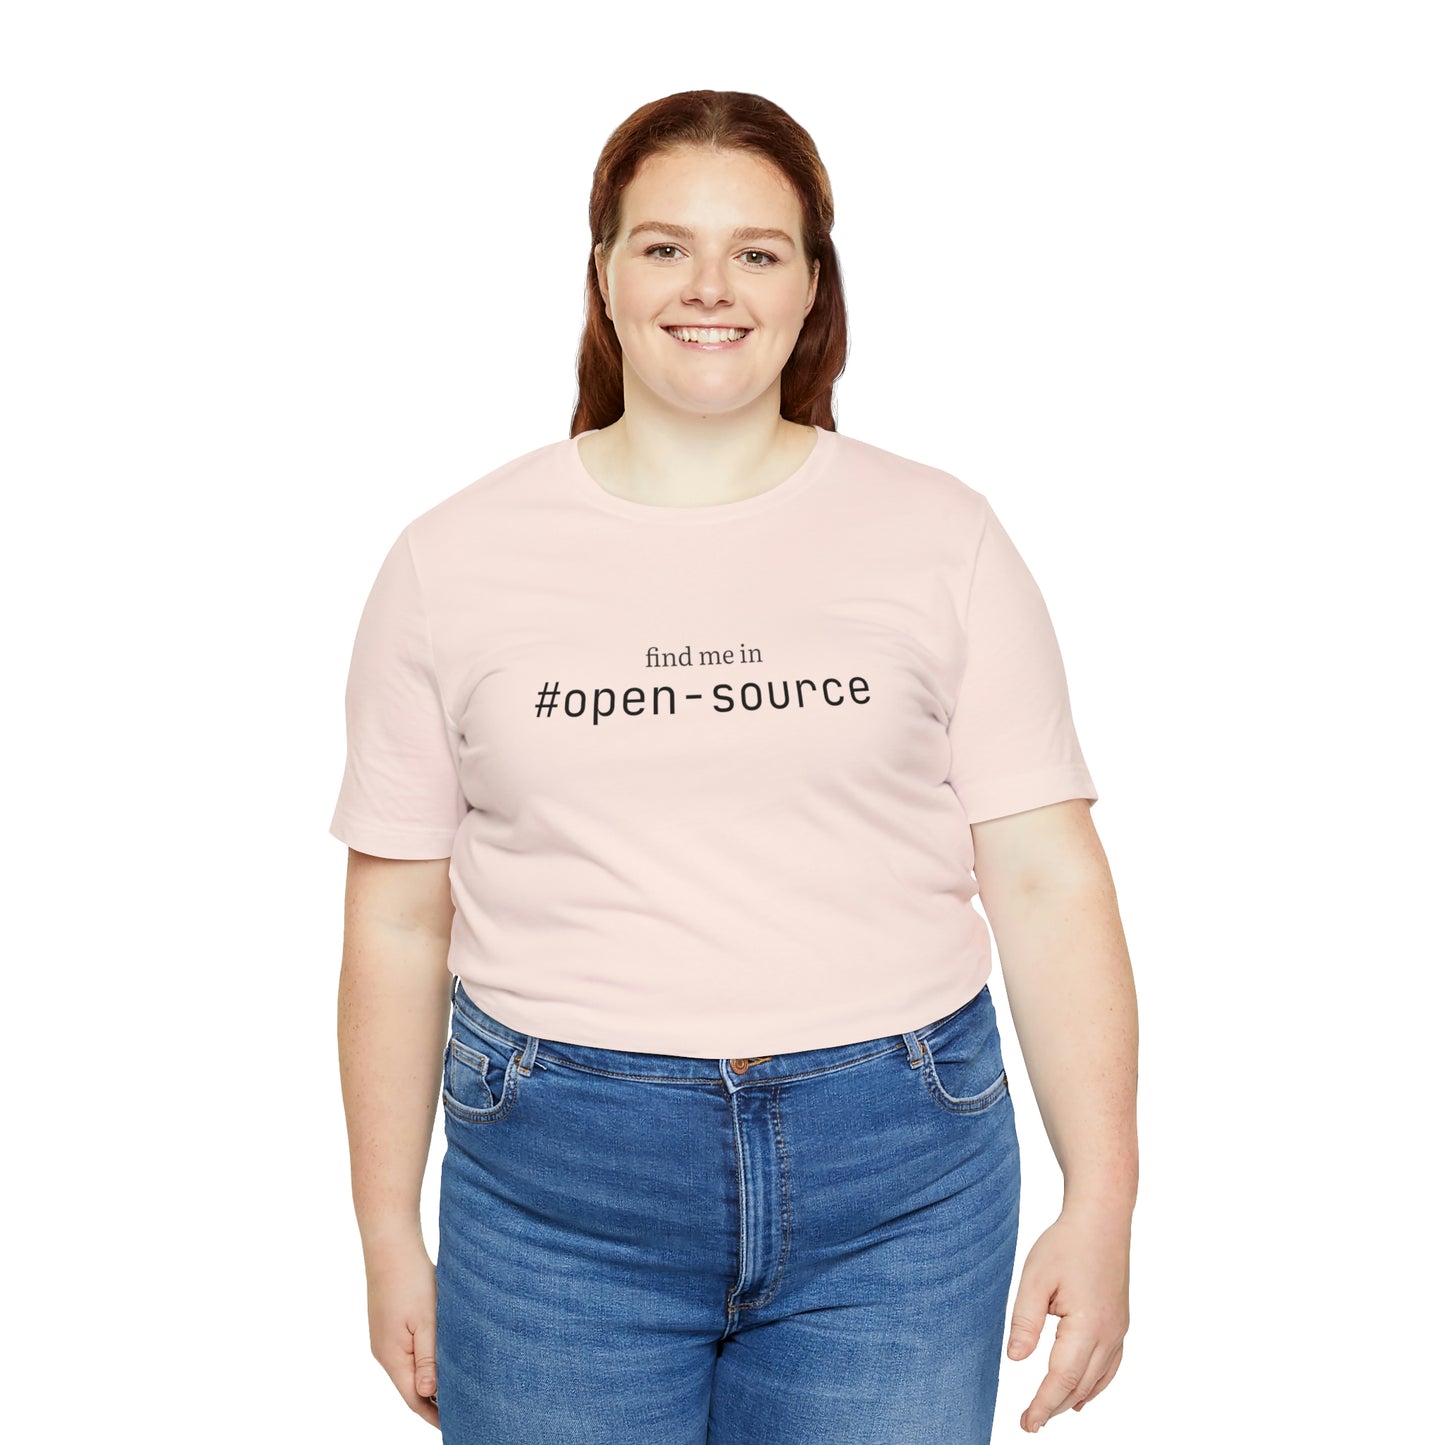 Find me in #open-source T-Shirt